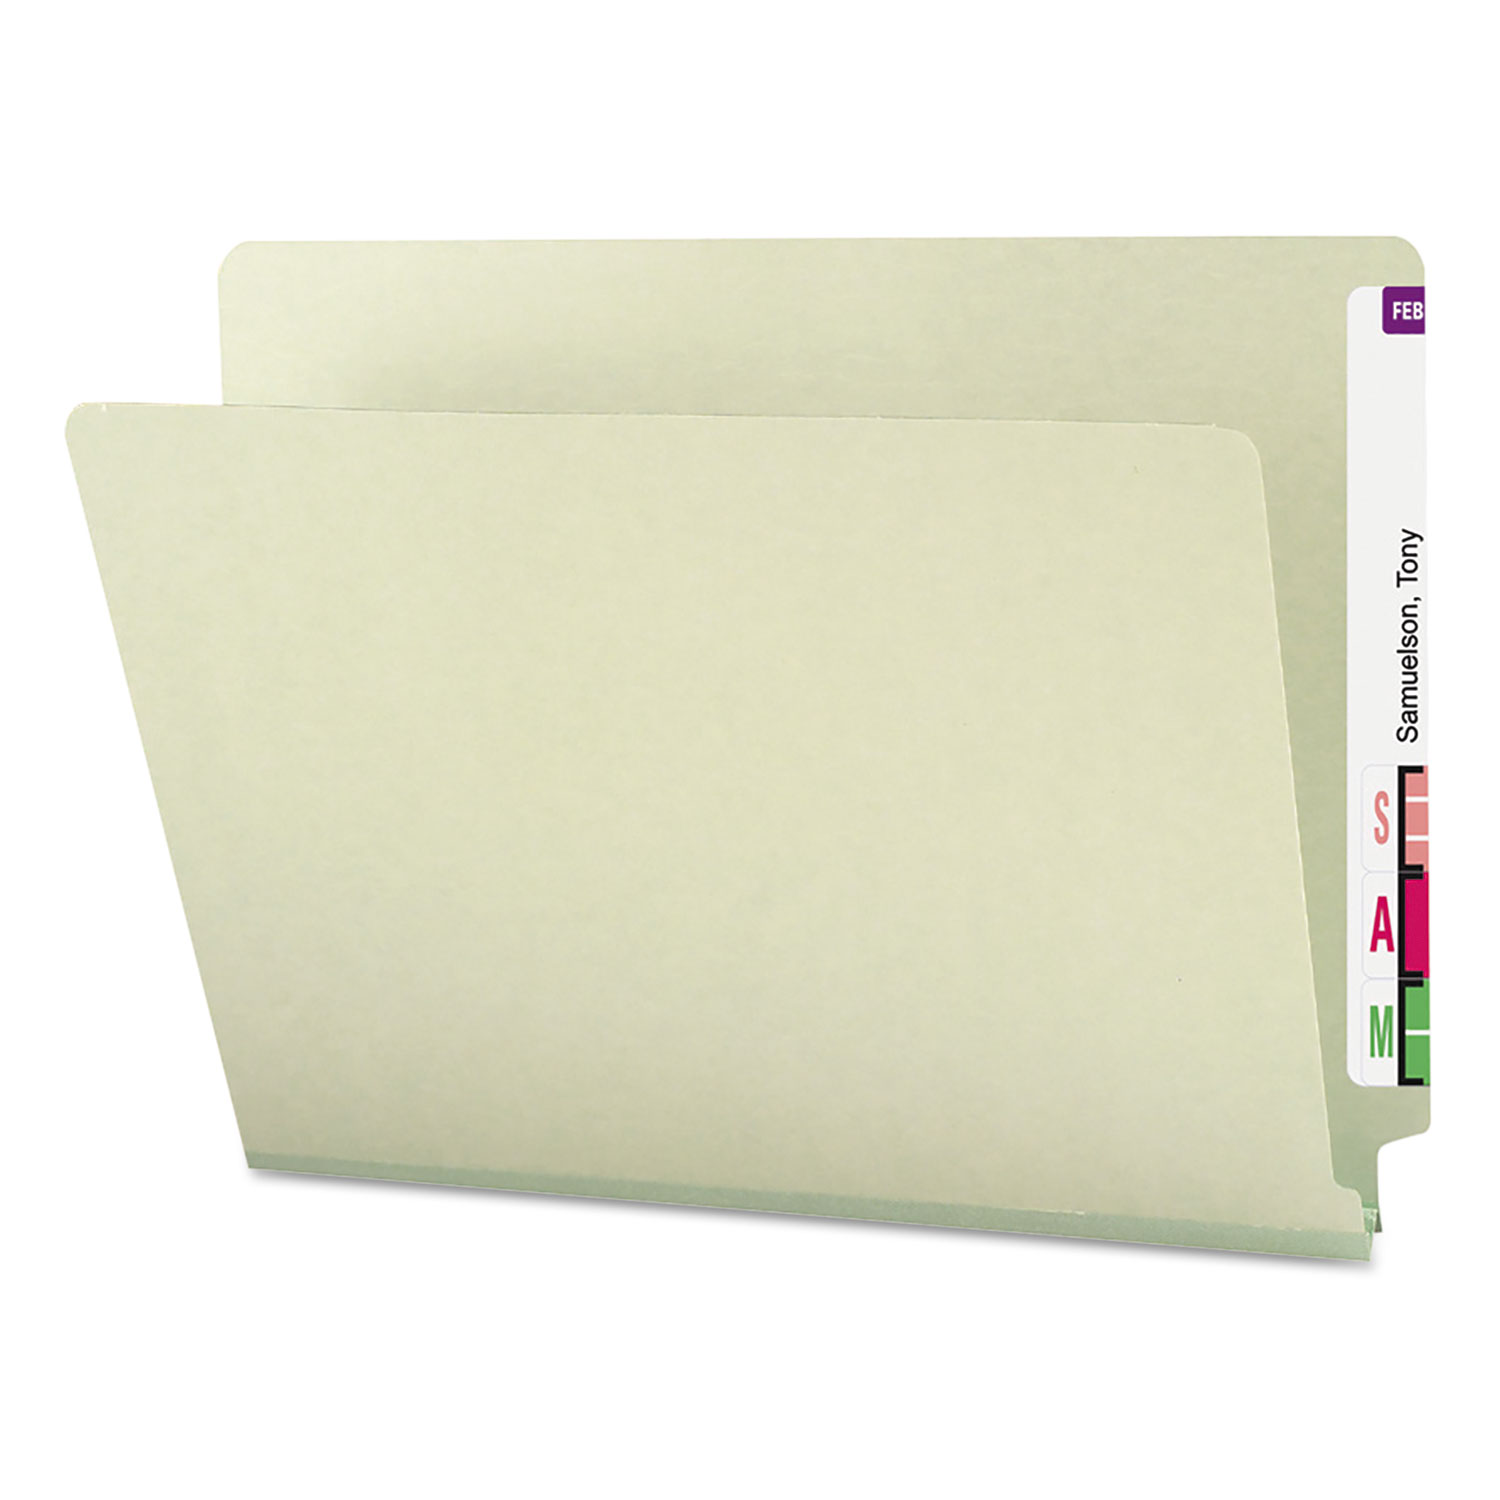  Smead 26200 Extra-Heavy Recycled Pressboard End Tab Folders, Straight Tab, 1 Expansion, Letter Size, Gray-Green, 25/Box (SMD26200) 